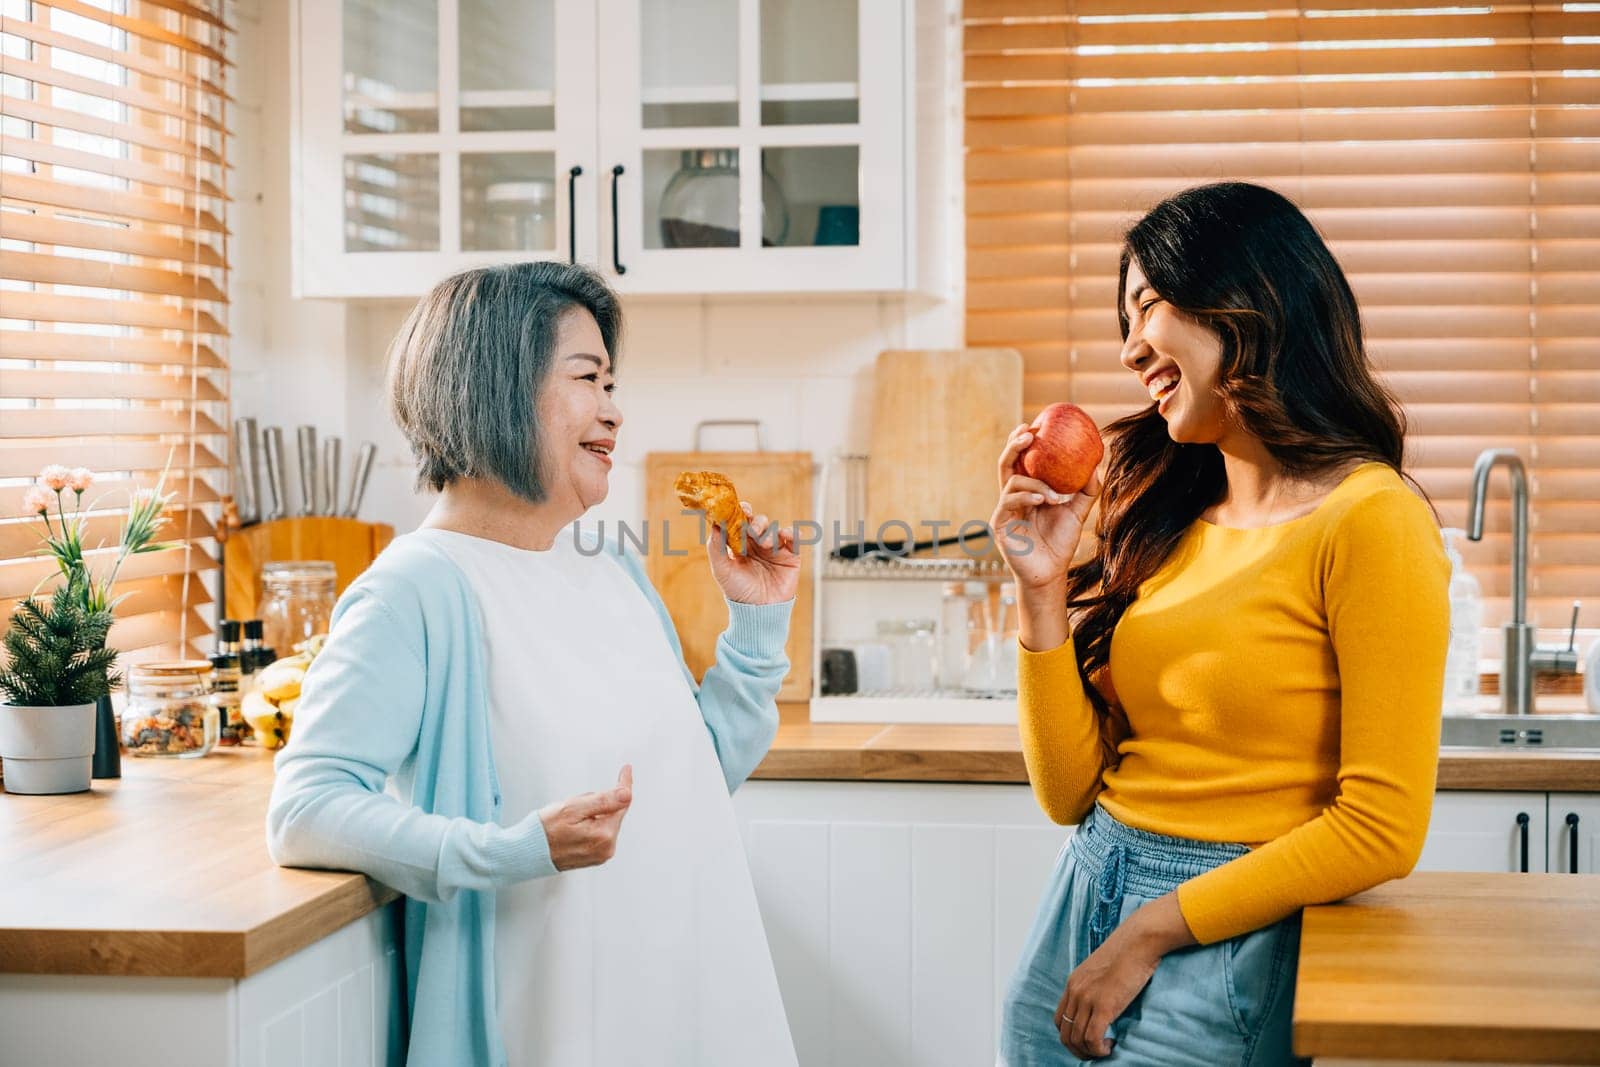 An elderly mother and her adult daughter, a young woman in an apron, bond over food in the kitchen. Their cheerful smiles highlight the happiness and fun of family togetherness at home.